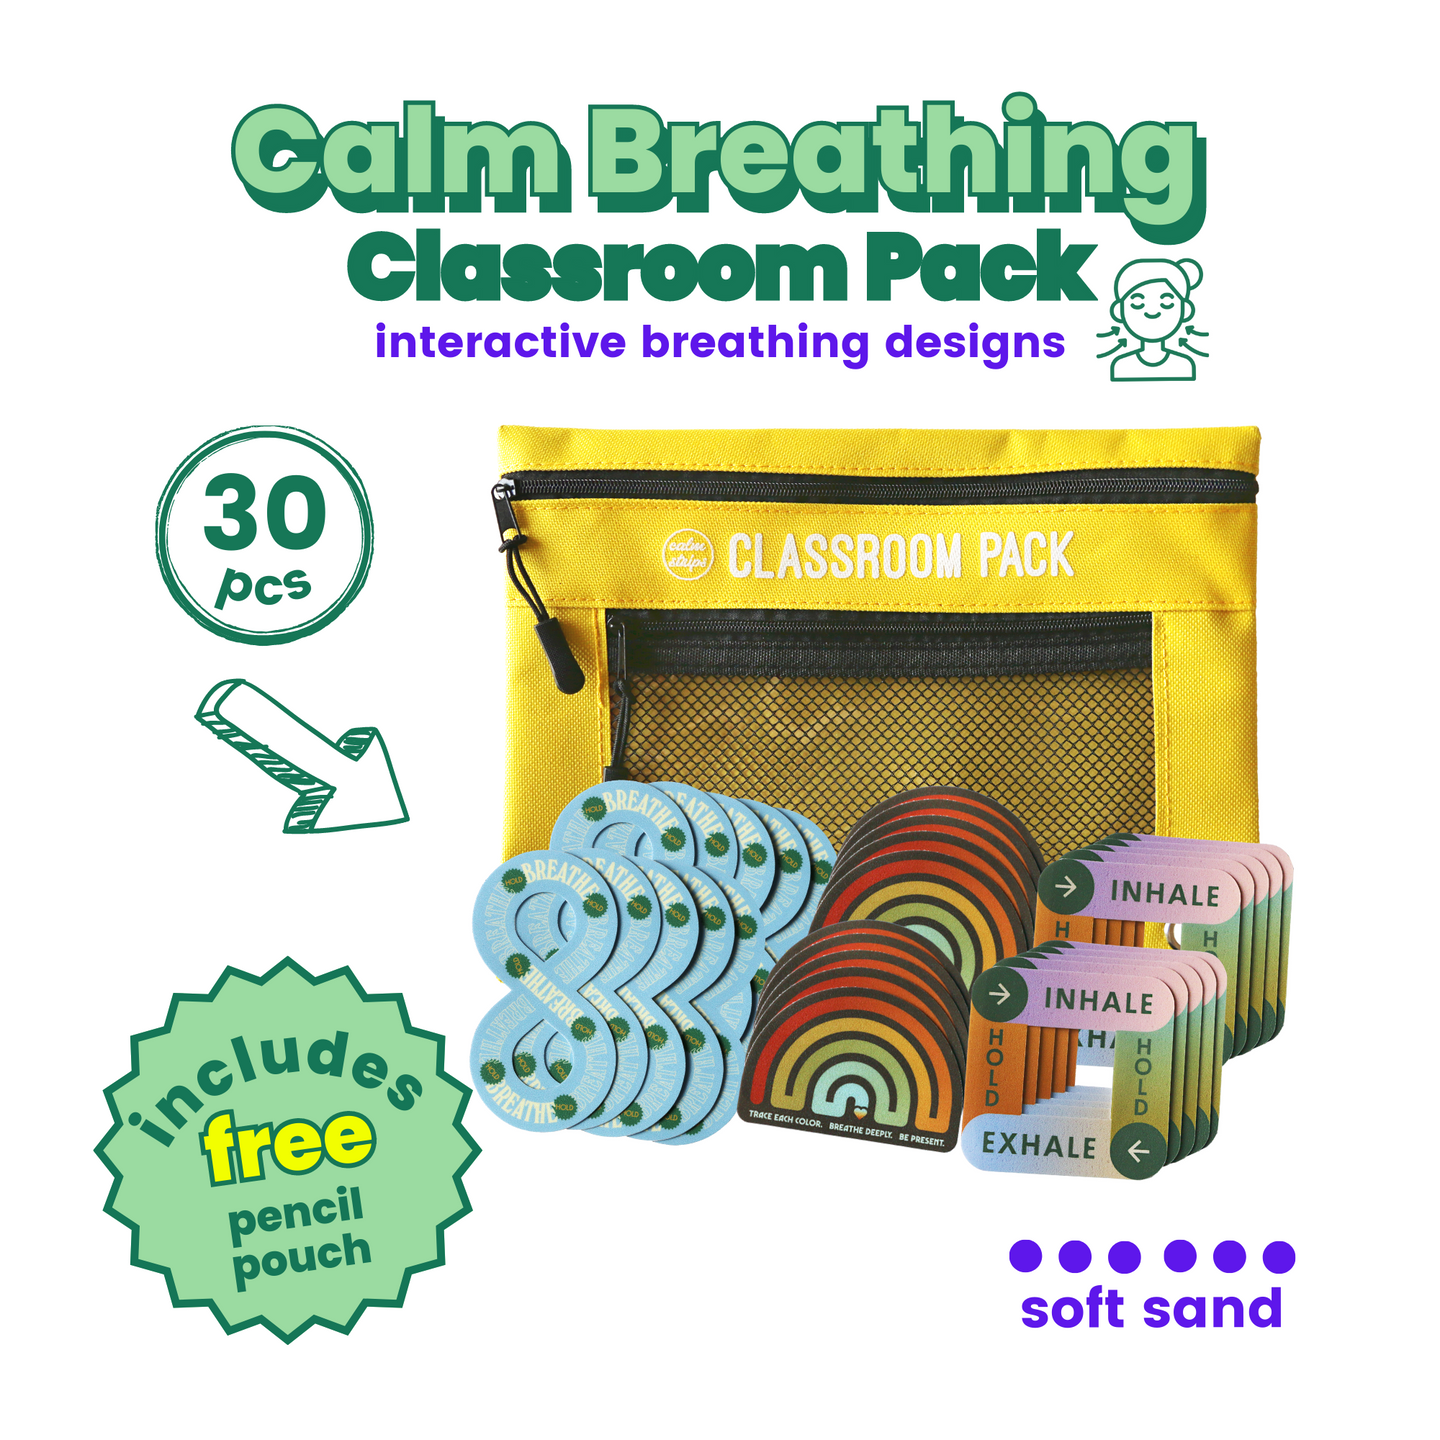 CALM BREATHING CLASSROOM PACK